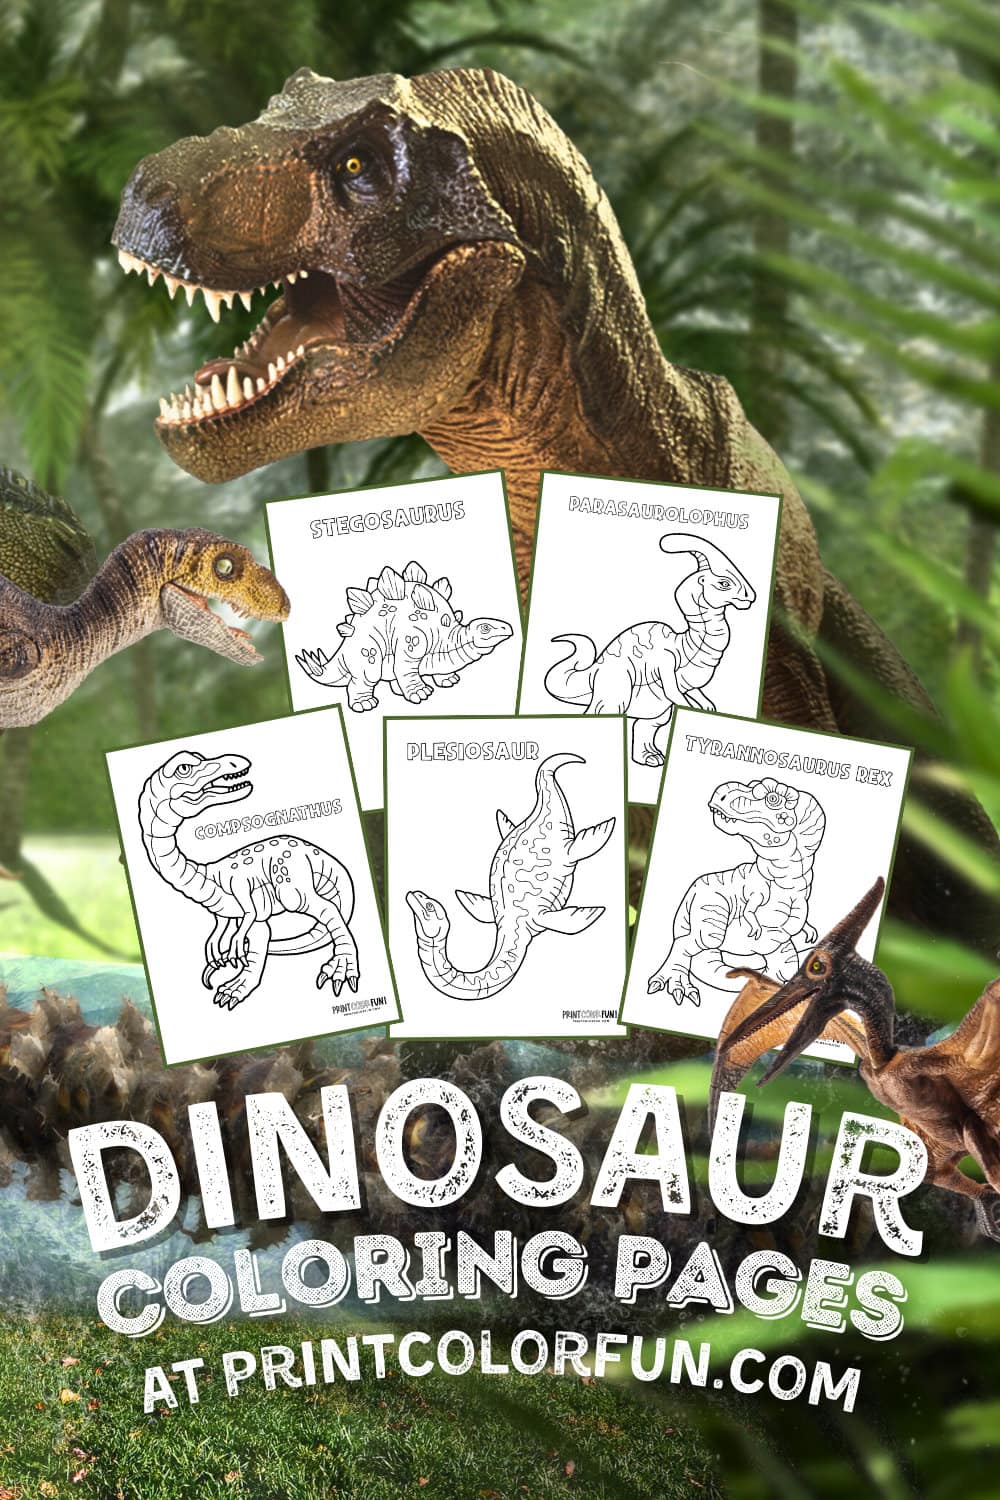 Dinosaur coloring pages and animal clipart - PrintColorFun com